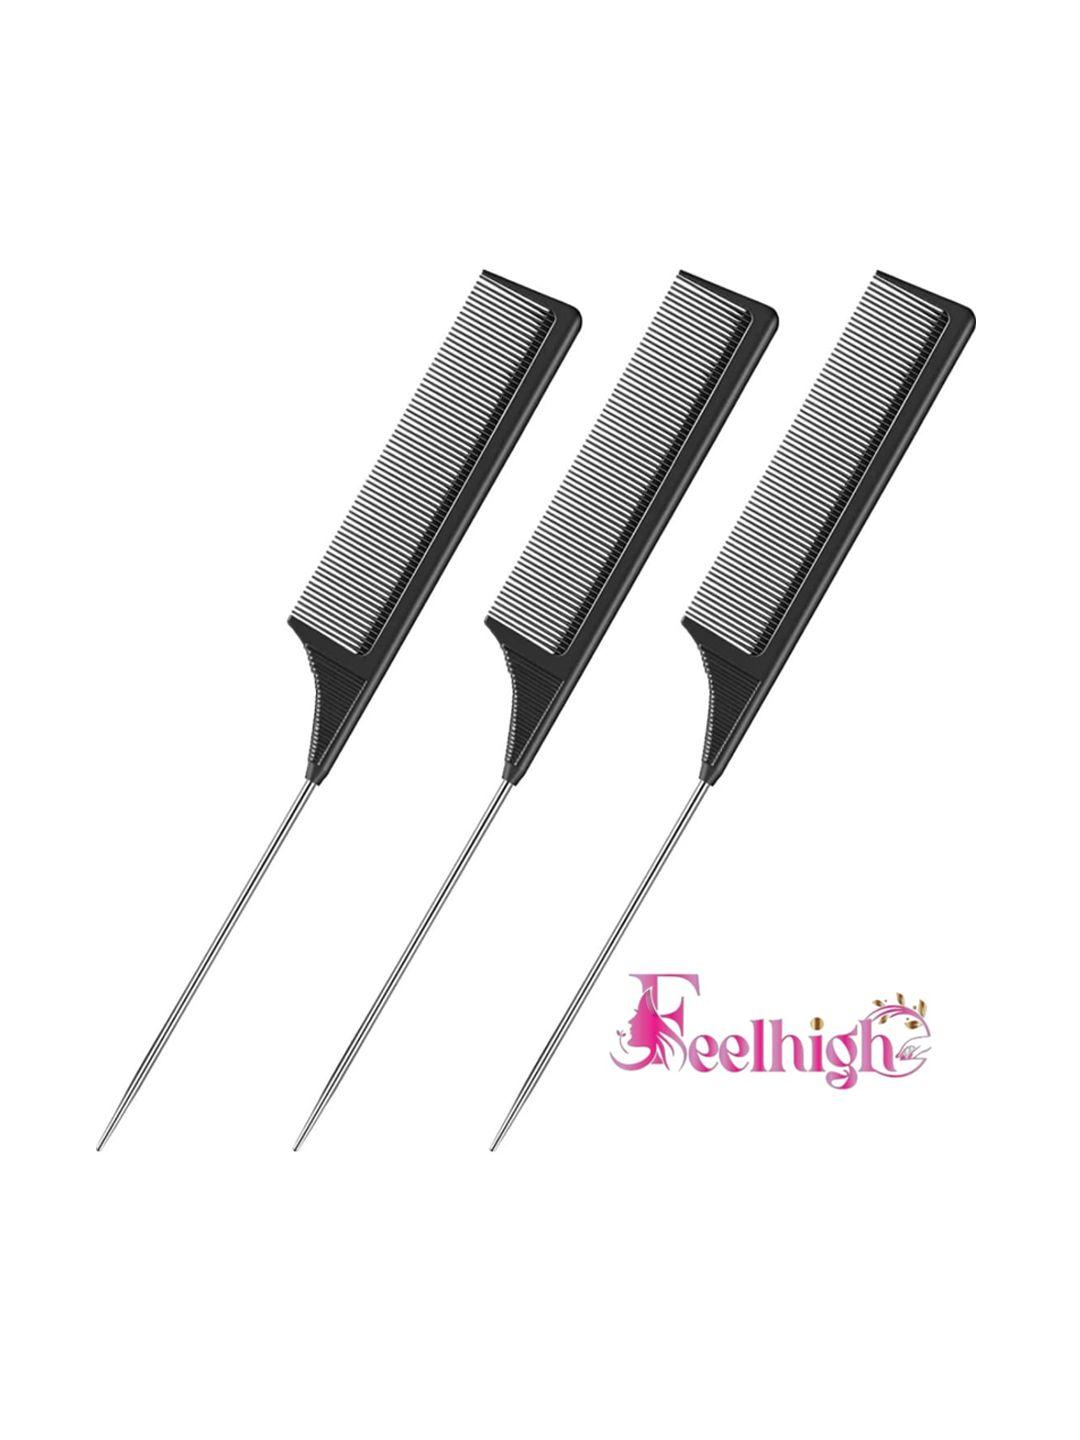 feelhigh set of 3 tail combs with stainless steel pintail